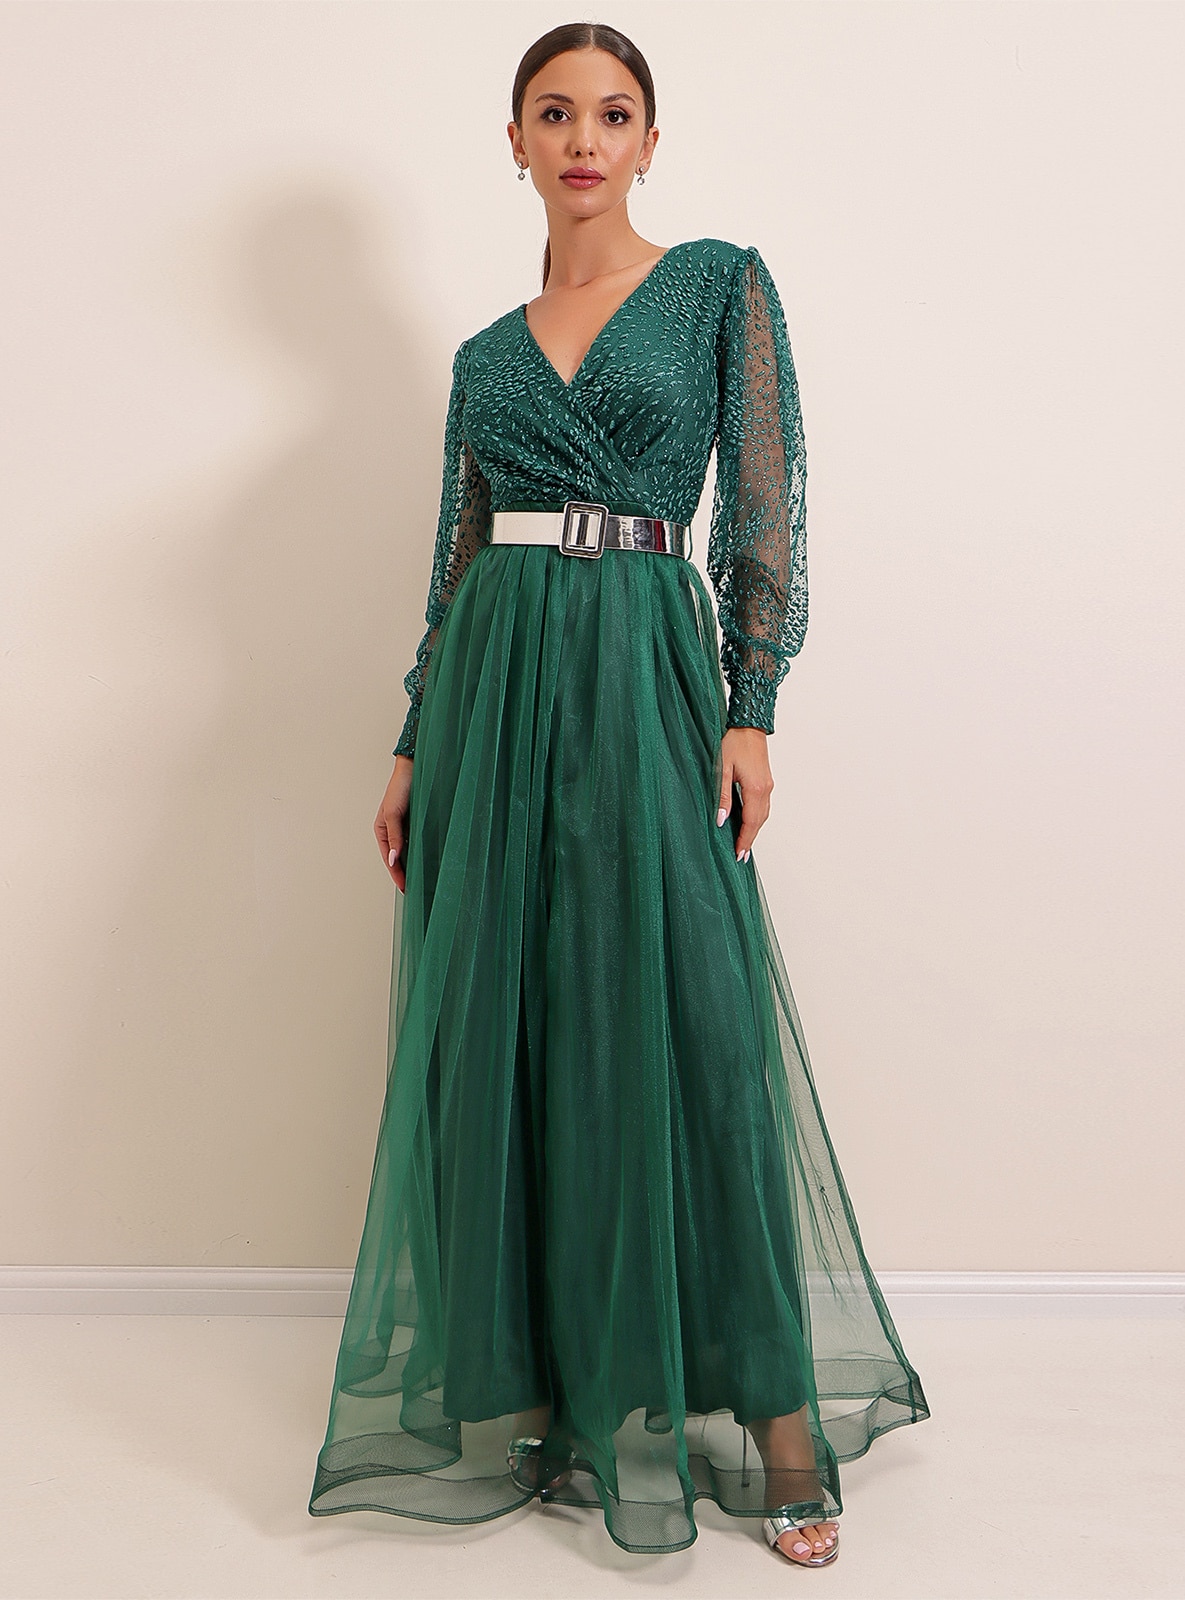 Fully Lined - Silvery - Emerald - Double-Breasted - Evening Dresses